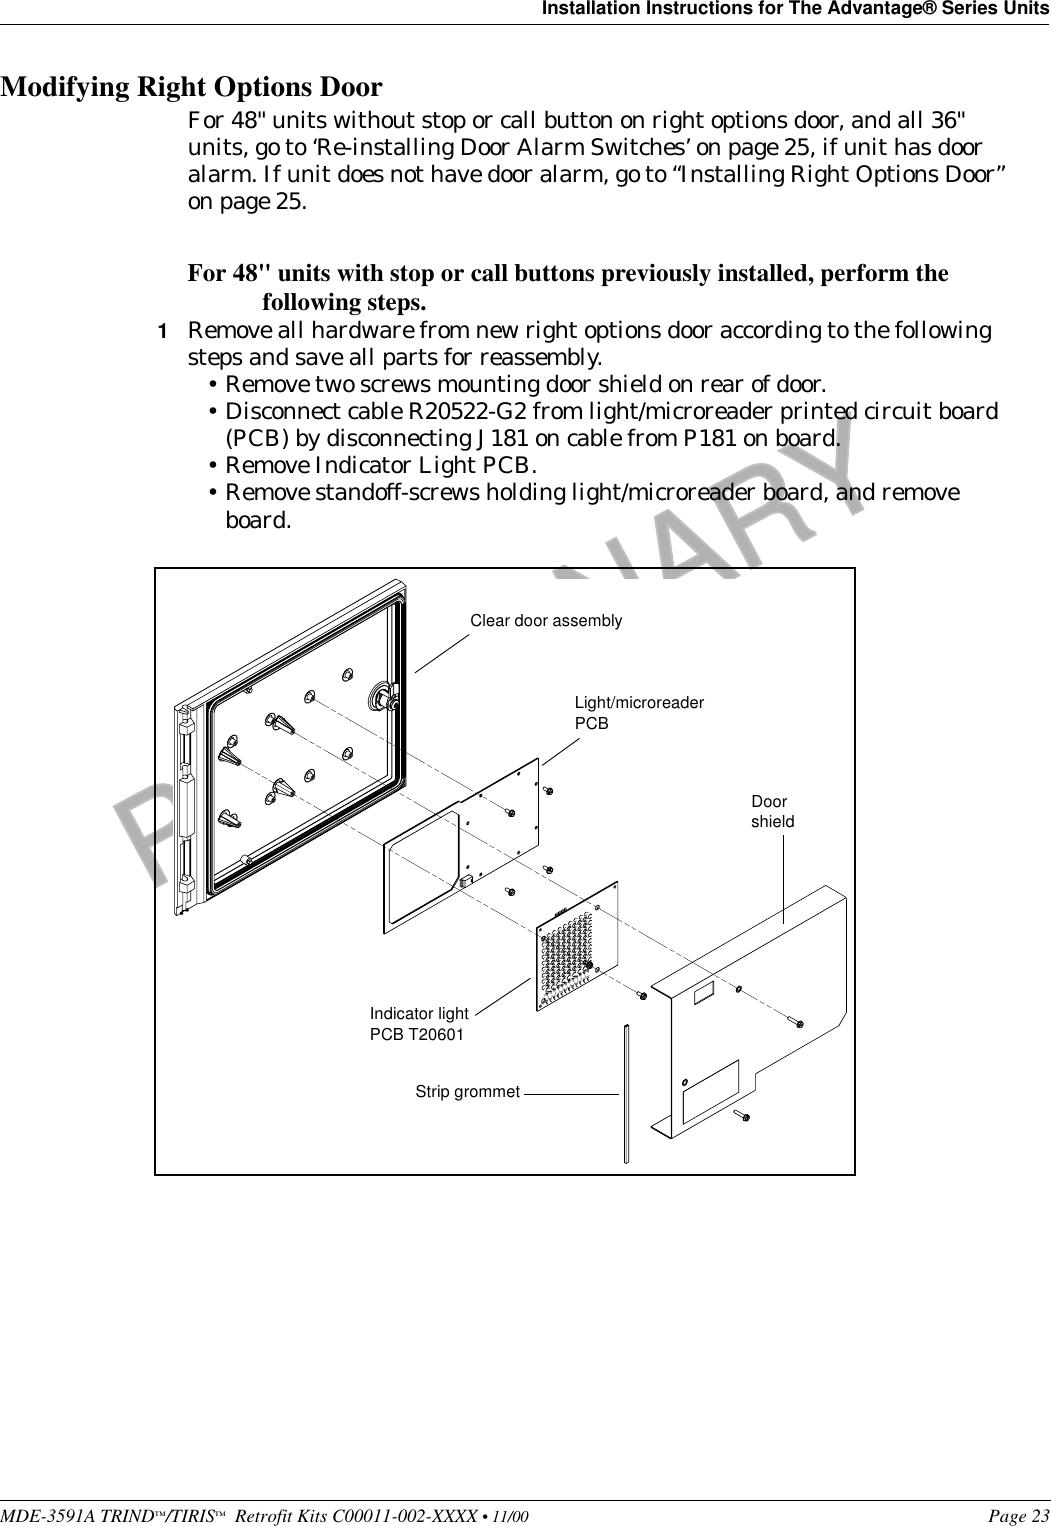 MDE-3591A TRIND™/TIRIS™  Retrofit Kits C00011-002-XXXX • 11/00 Page 23Installation Instructions for The Advantage® Series UnitsPRELIMINARYFCC 11/30Modifying Right Options DoorFor 48&quot; units without stop or call button on right options door, and all 36&quot; units, go to ‘Re-installing Door Alarm Switches’ on page 25, if unit has door alarm. If unit does not have door alarm, go to “Installing Right Options Door” on page 25. For 48&quot; units with stop or call buttons previously installed, perform the following steps.1Remove all hardware from new right options door according to the following steps and save all parts for reassembly.•Remove two screws mounting door shield on rear of door.•Disconnect cable R20522-G2 from light/microreader printed circuit board (PCB) by disconnecting J181 on cable from P181 on board.•Remove Indicator Light PCB.•Remove standoff-screws holding light/microreader board, and remove board.DoorshieldLight/microreader PCBIndicator light PCB T20601Strip grommetClear door assembly